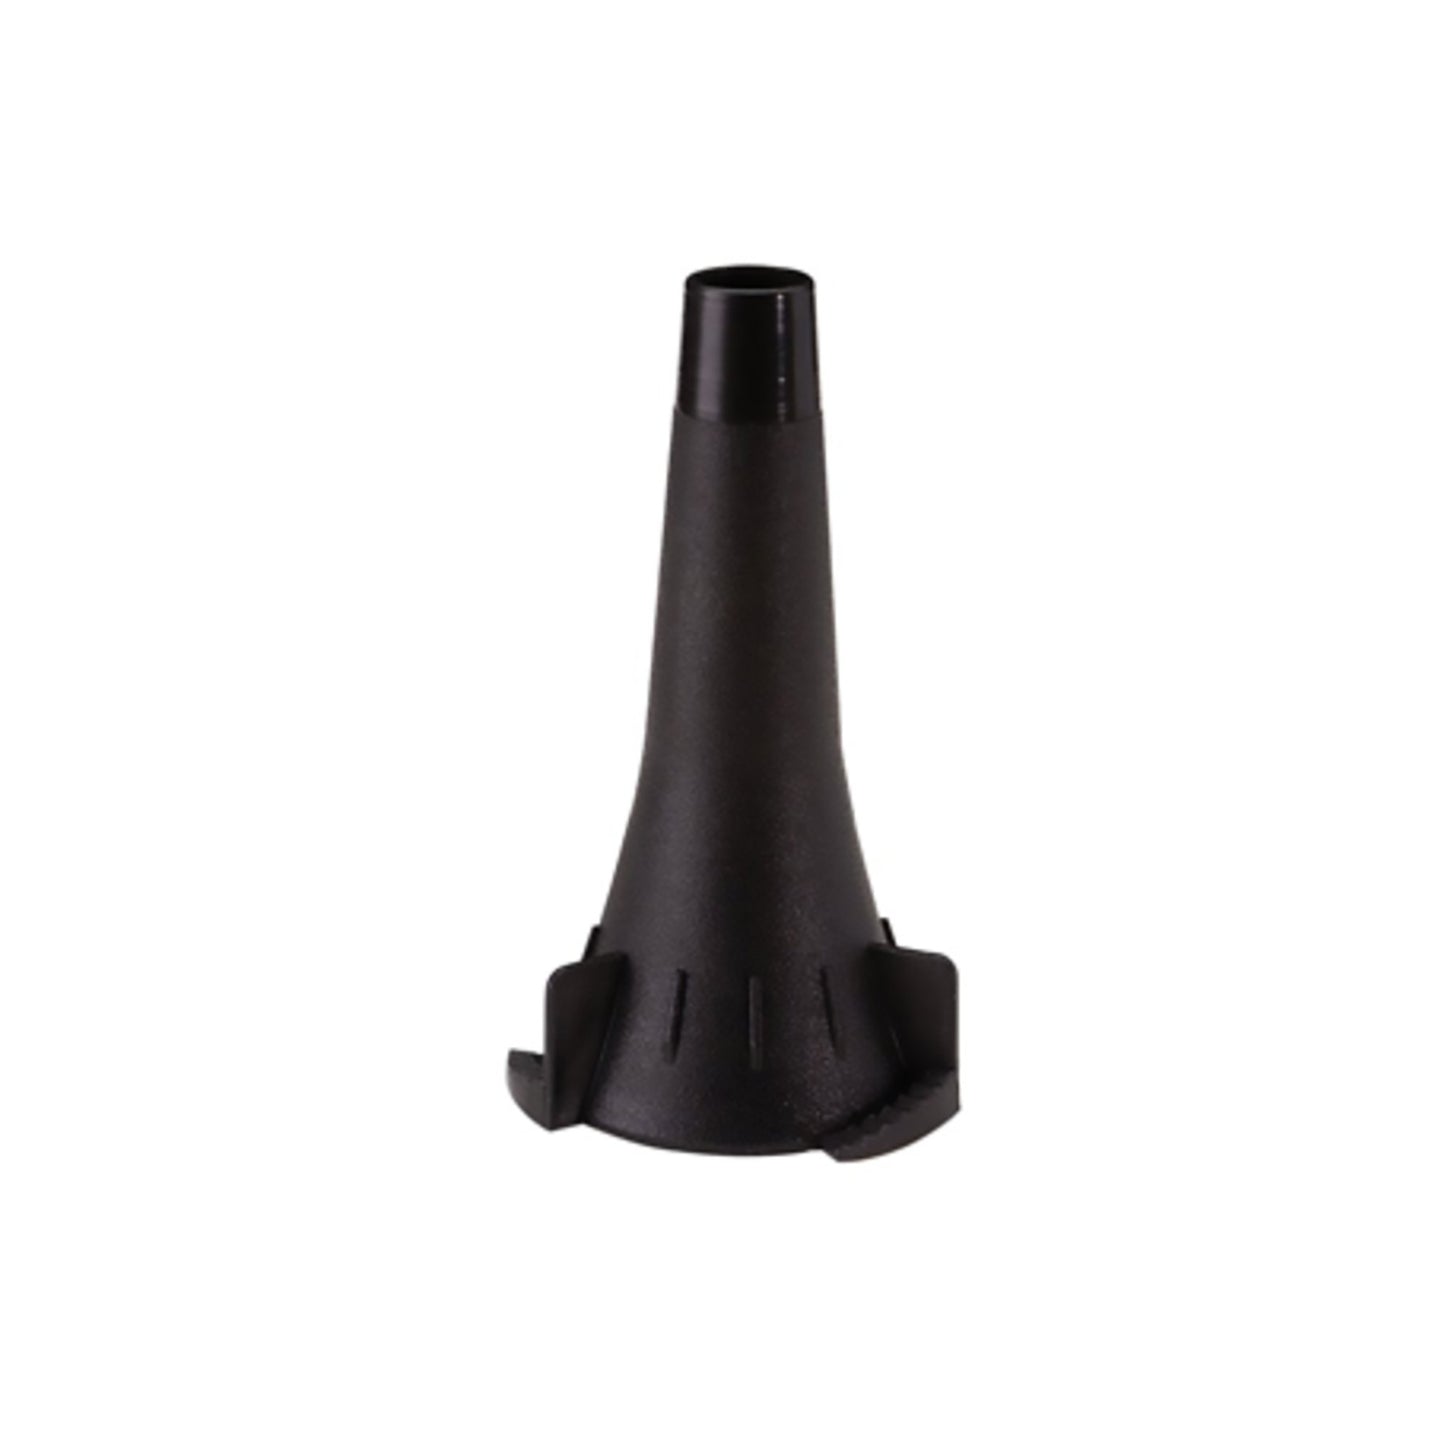 WELCH ALLYN KLEENSPEC® DISPOSABLE OTOSCOPE SPECULA, 2.75 mm